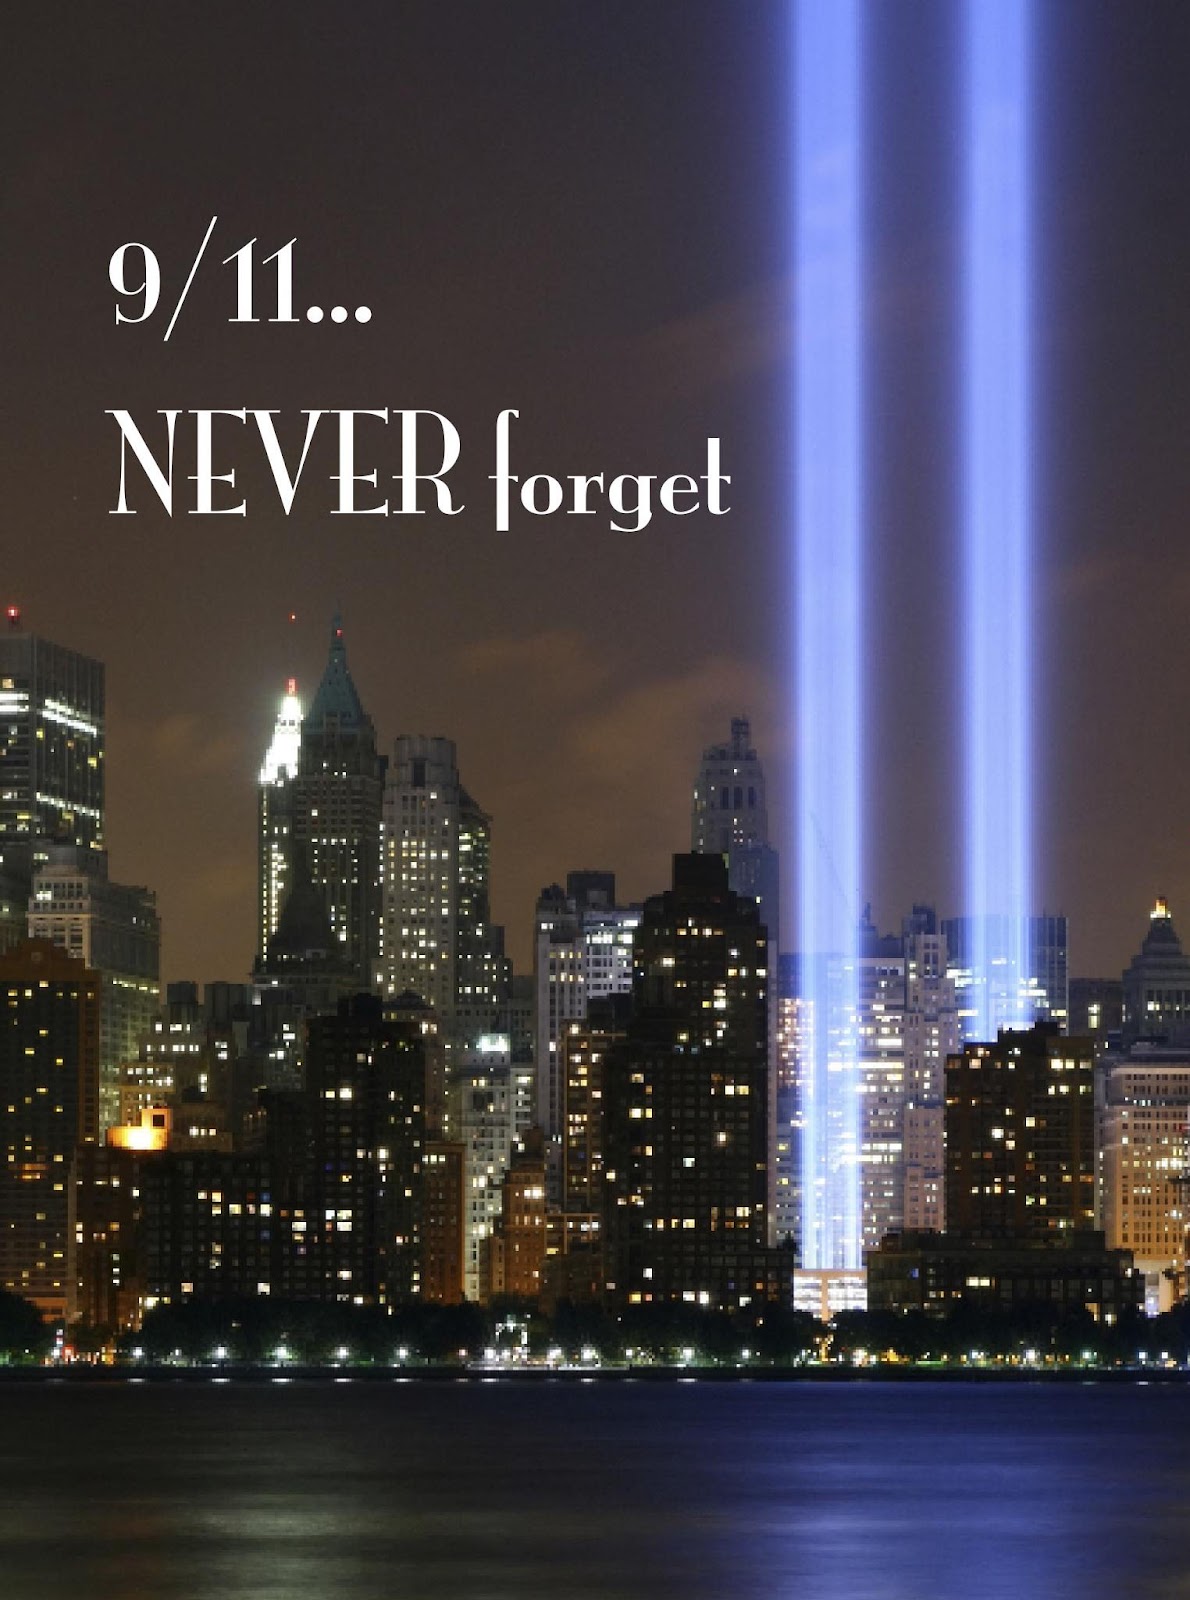 9/11 ANNIVERSARY: WE SHALL NEVER FORGET